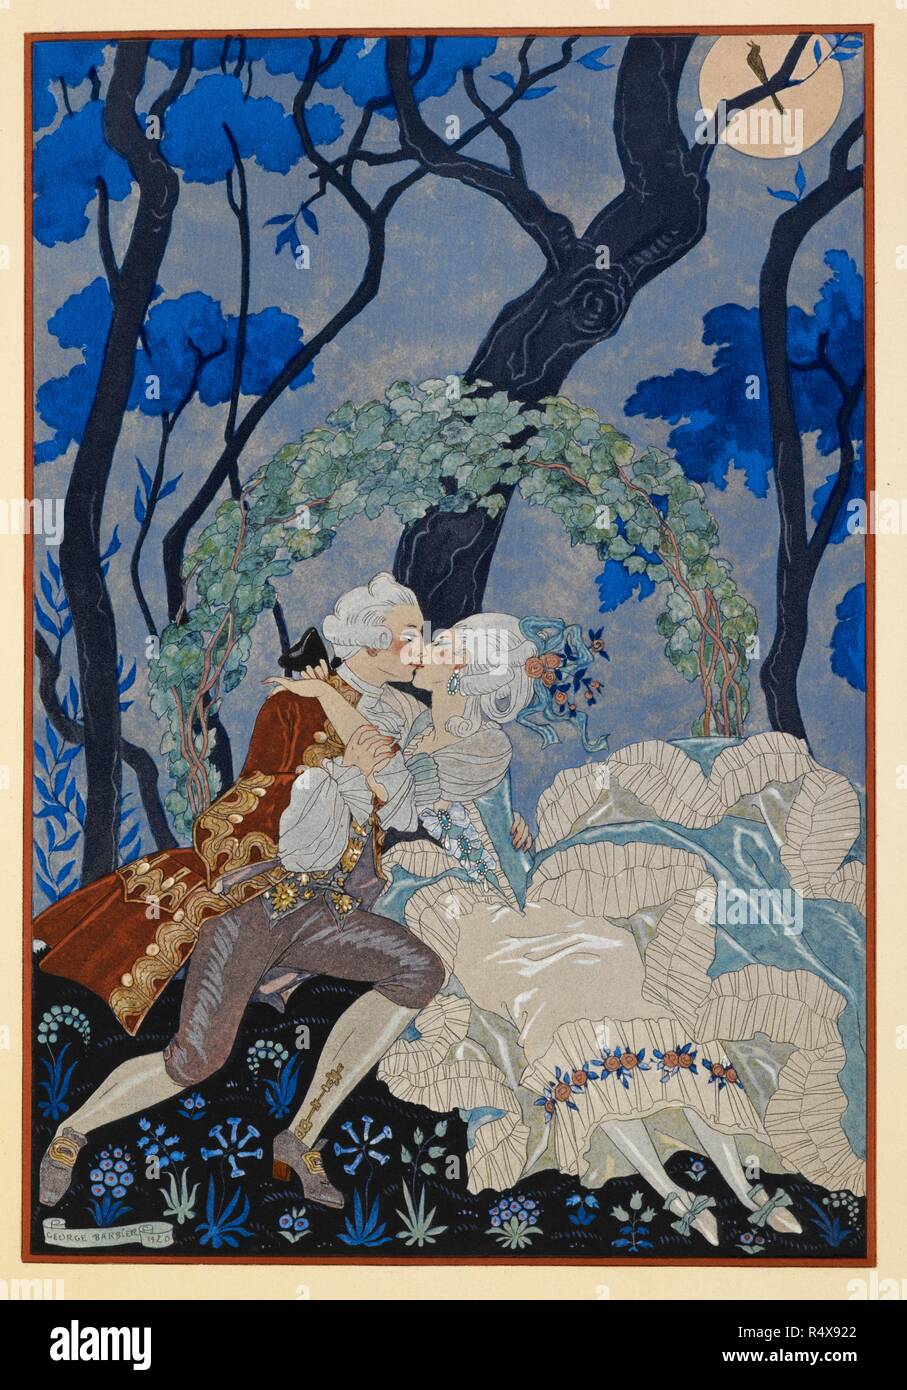 En Sourdine. A man and woman kissing under the moonlight. FÃªtes galantes. [PoÃ¨mes]. Illustrations de George Barbier. Paris: H. Piazza, 1928. FÃªtes Galantes is an album consisting of romantic prints of French life among the upper classes of the 19th century. Rich aristocrats of the French court used to play gallant scenes from the commedia dellâ€™ arte that were called Fetes Galantes. The prints accompany Paul Verlaine's poetry. Each album contains 20 lithograph prints with pochoir highlighting by George Barbier. Source: L.45/2847, before page 91. Language: French. Stock Photo